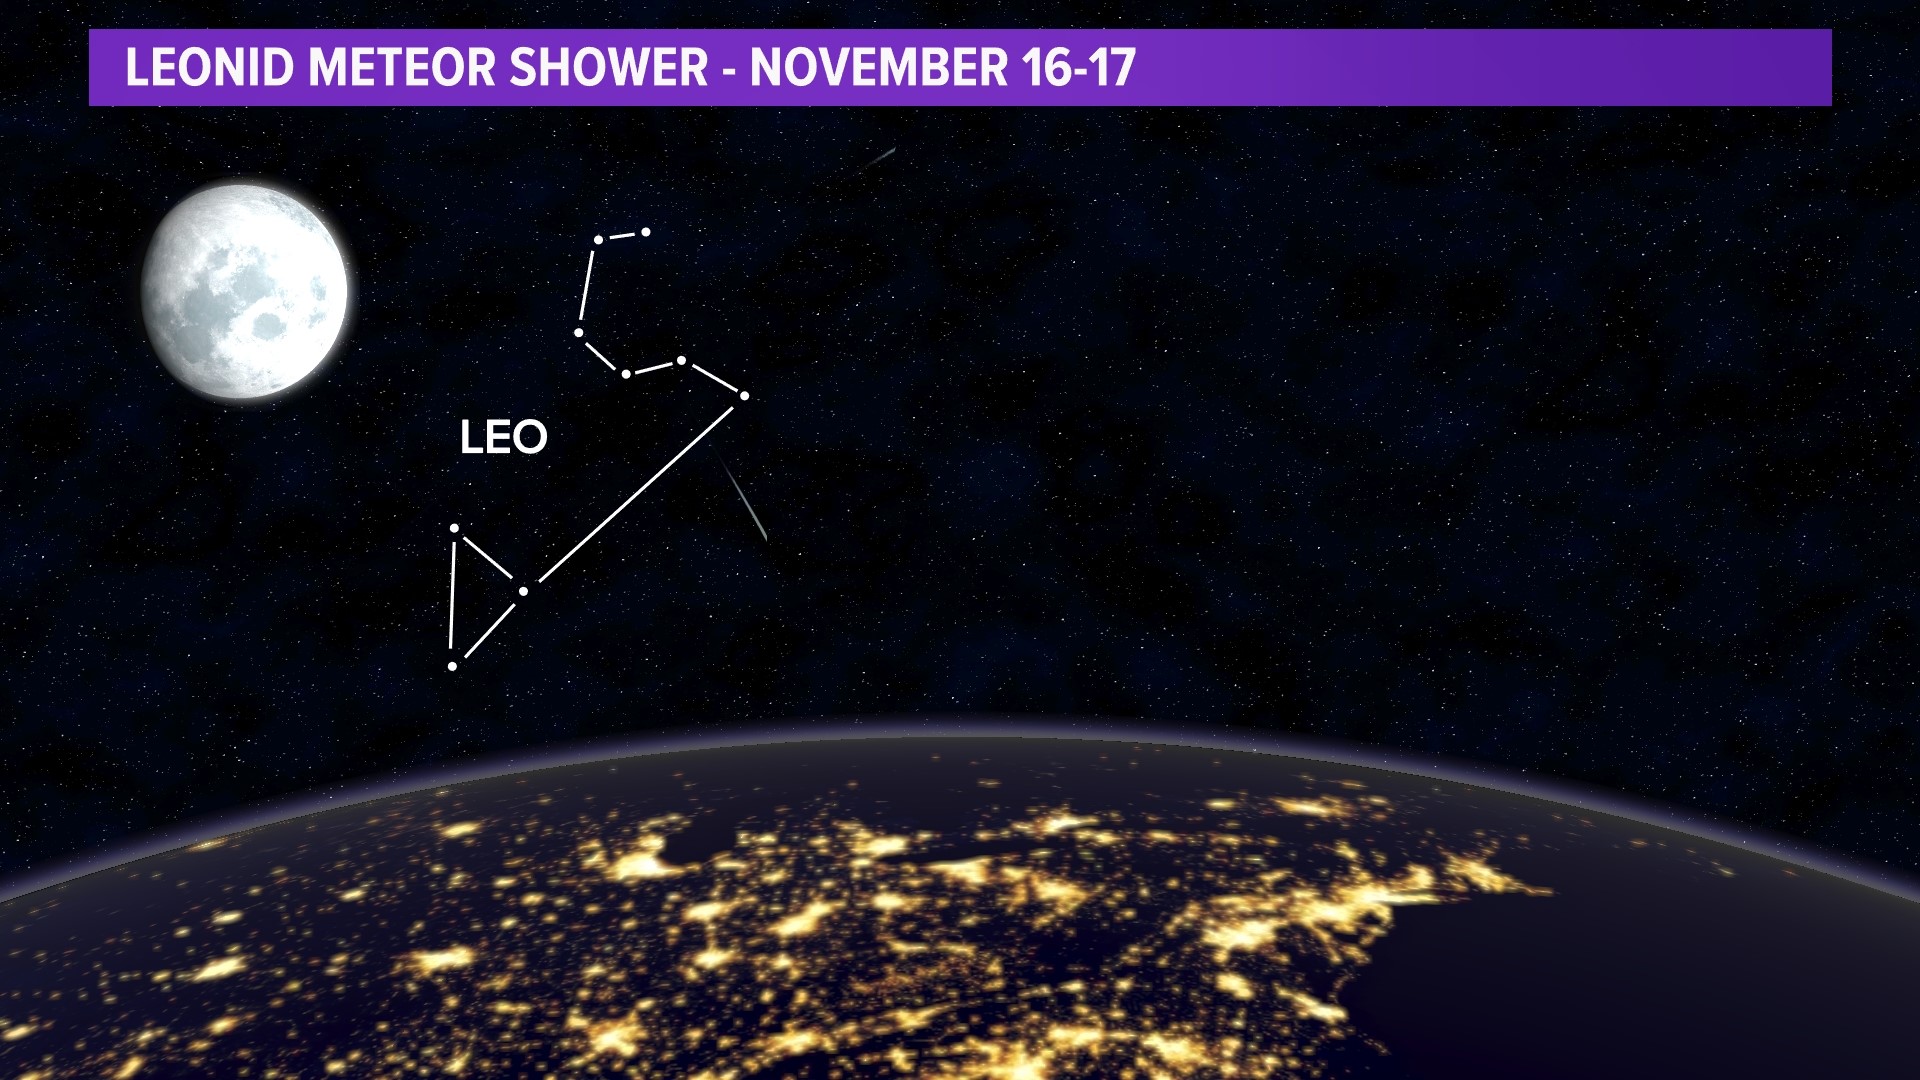 If you can find some clear skies, you could spot some meteors on Nov. 16 and Nov. 17.